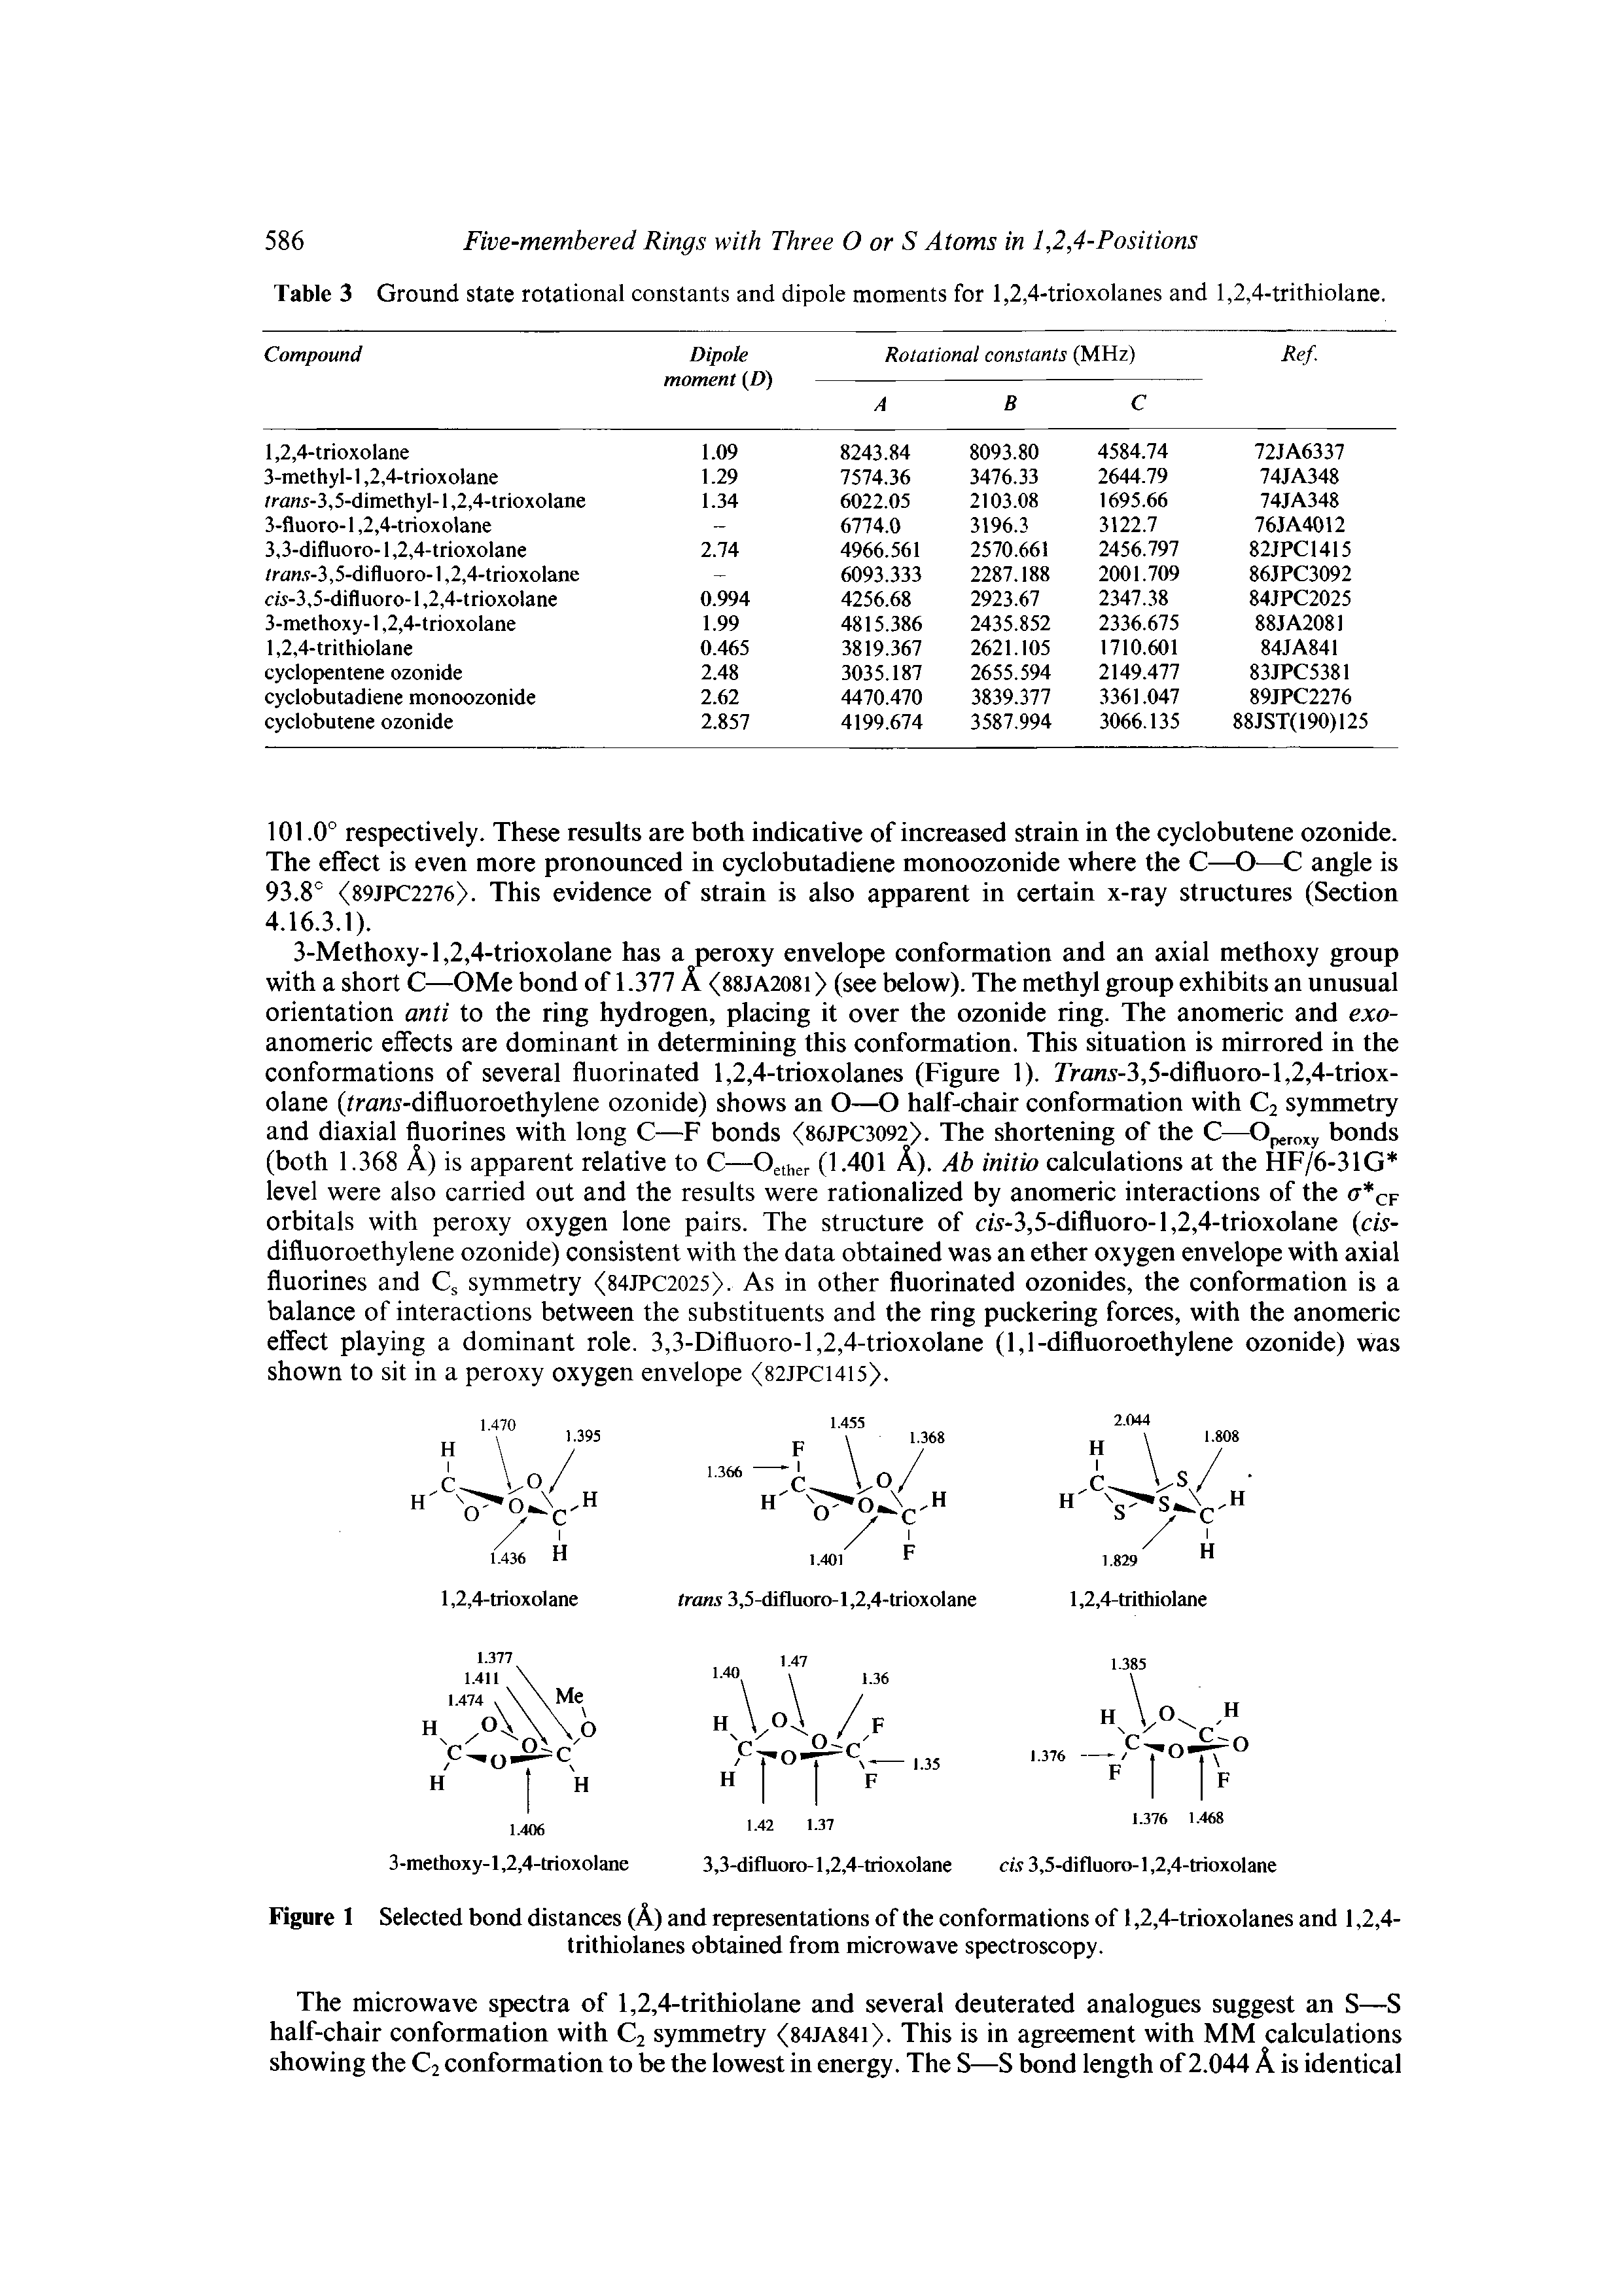 Table 3 Ground state rotational constants and dipole moments for 1,2,4-trioxolanes and 1,2,4-trithiolane.